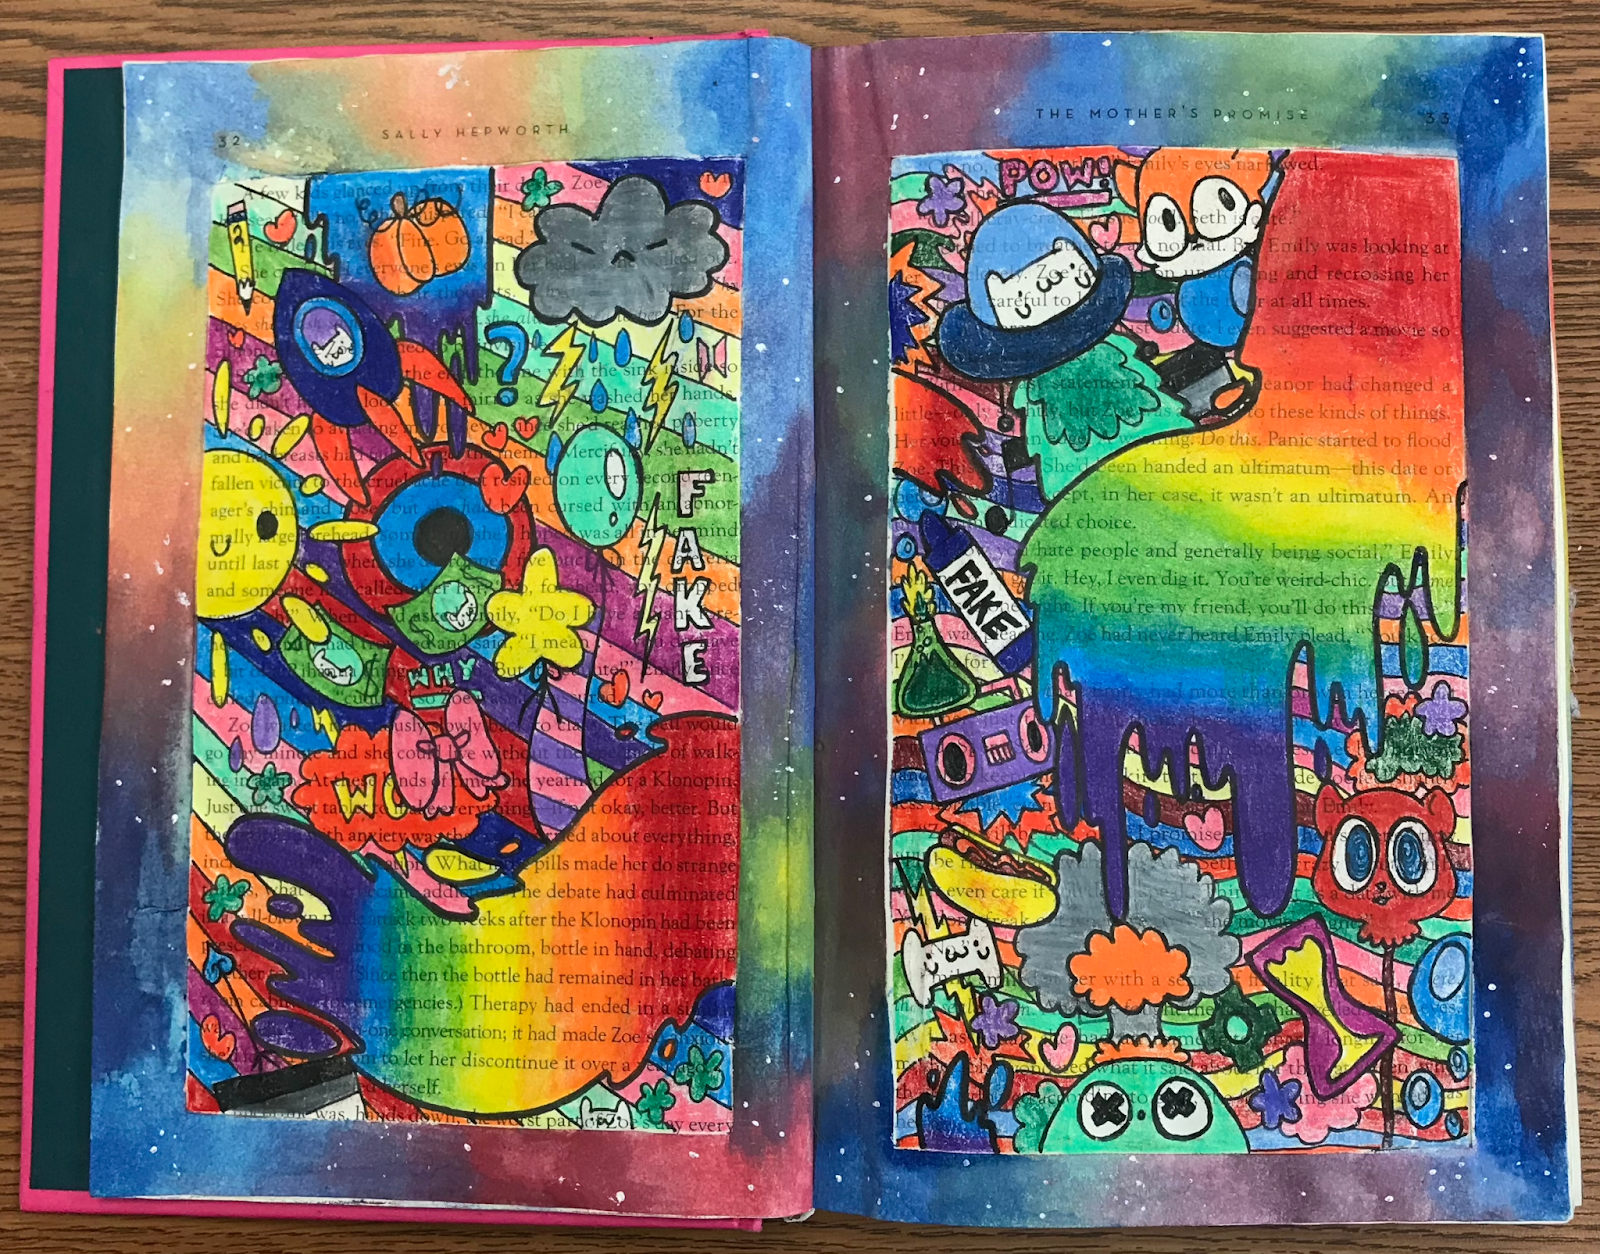 Scrapbook Pages from the Mixed Media Art Family Album Project with rainbows and colorful cartoons this project is by Tiffany Fox of MrsTFox Resources Art Curriculum
